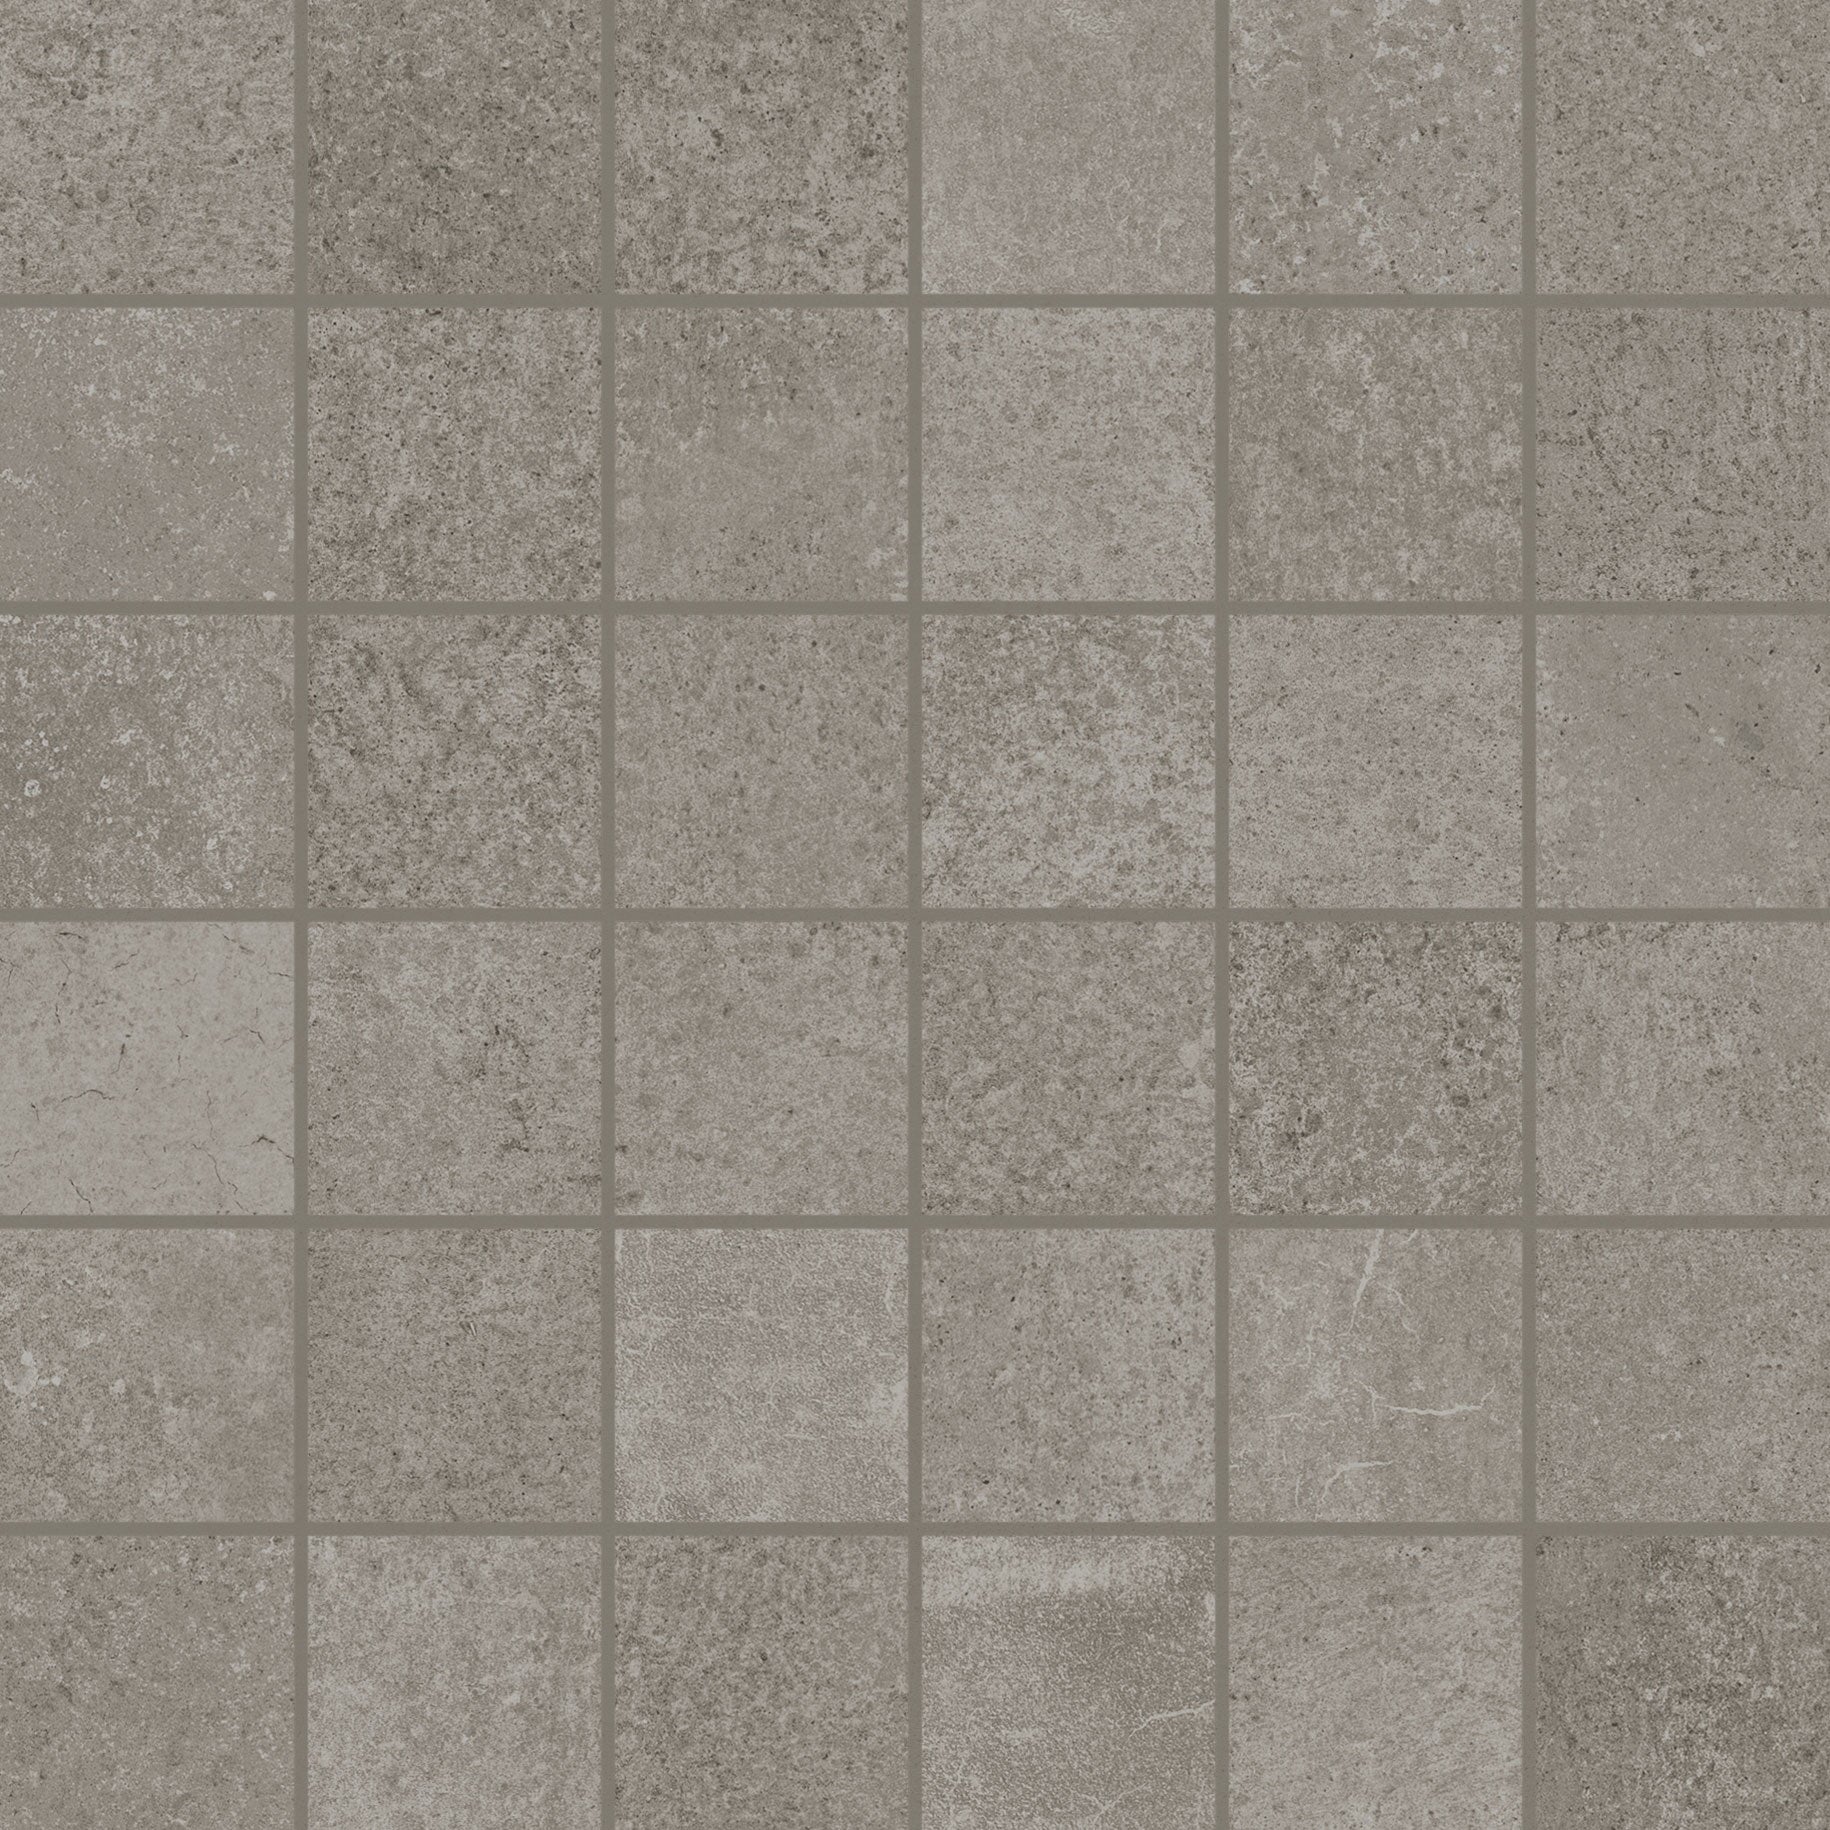 landmark 9mm madein vision grey straight stack 2x2 mosaic 12x12x9mm matte rectified porcelain tile distributed by surface group international